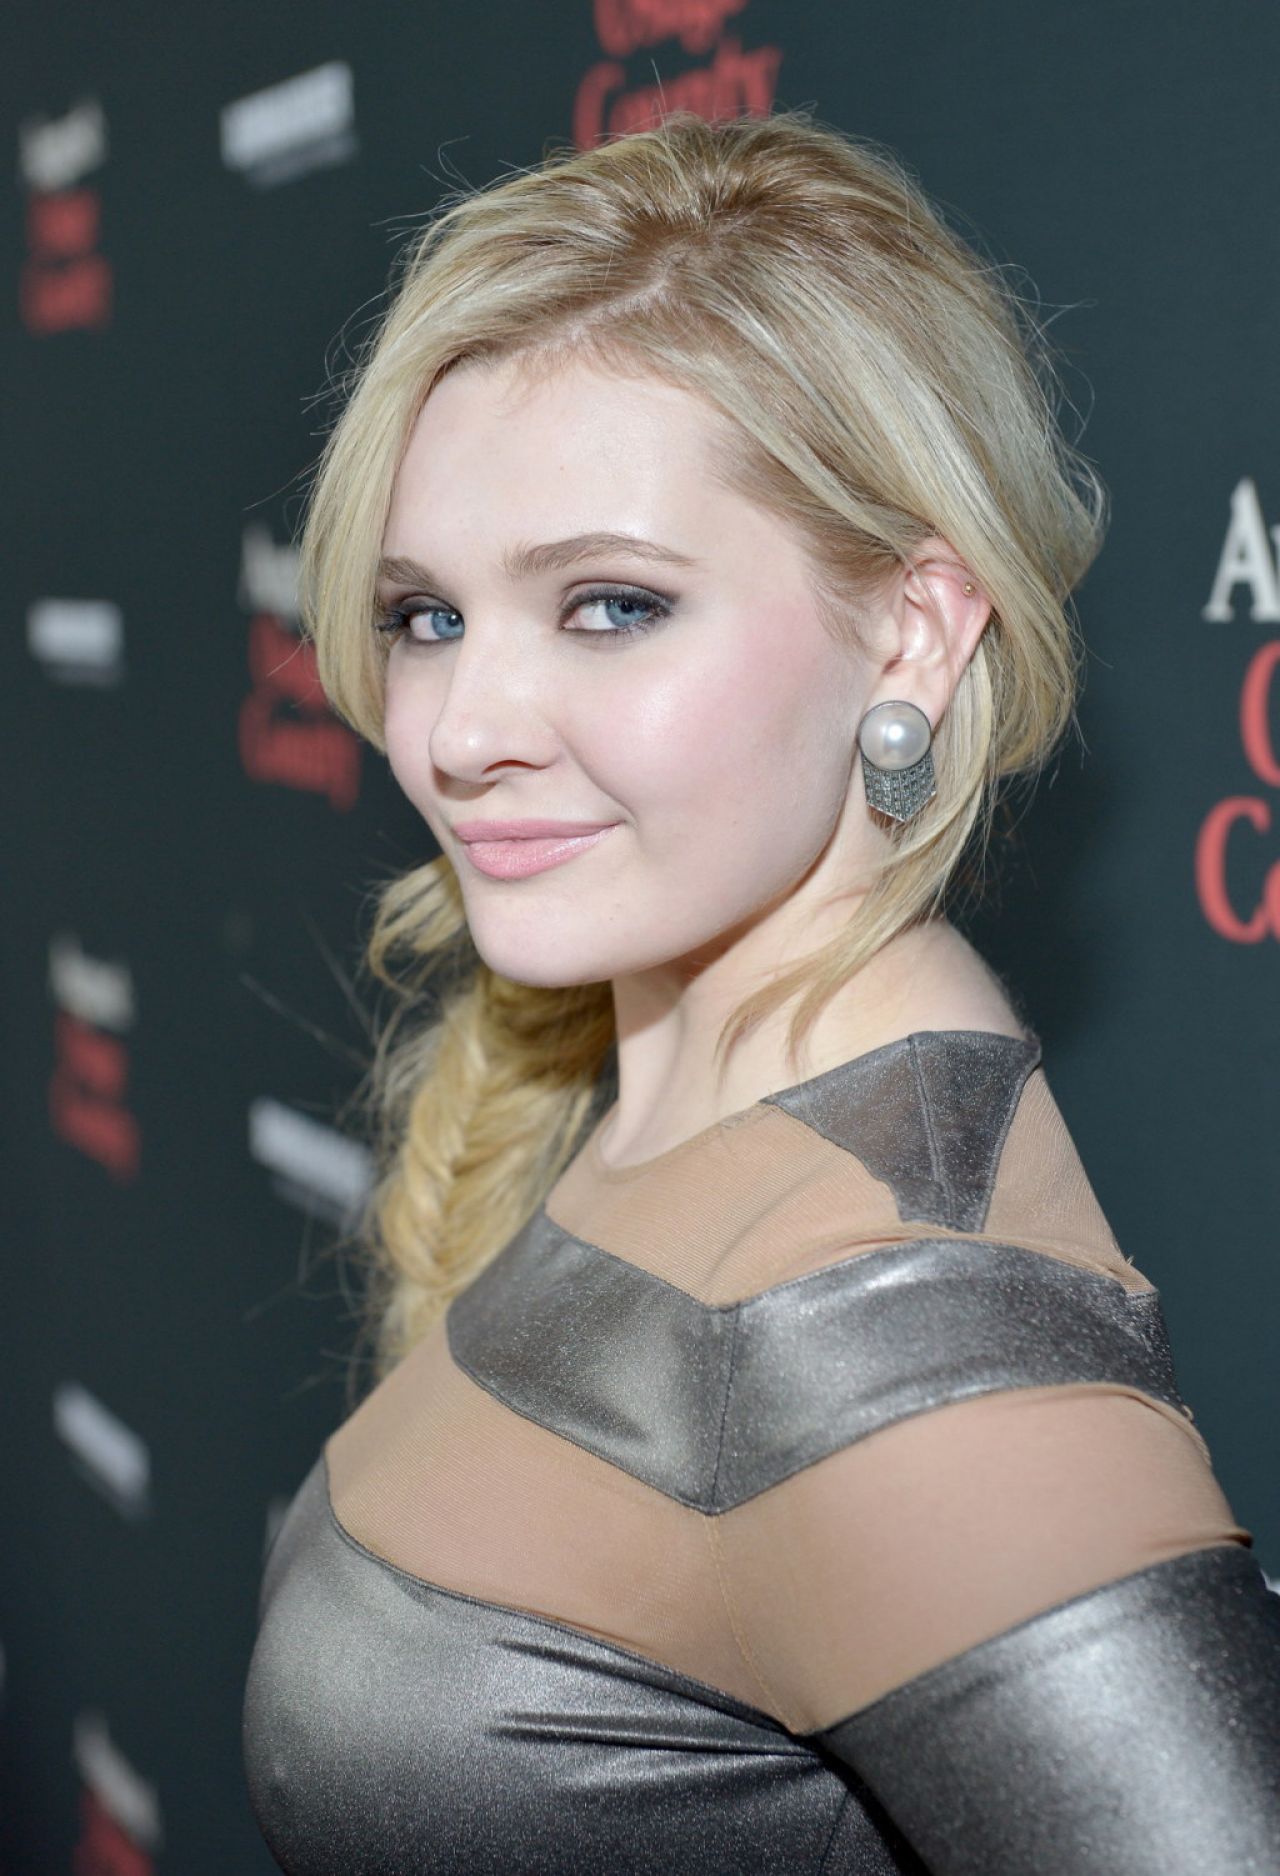 Abigail Breslin AUGUST OSAGE COUNTY Movie Premiere in Los Angeles